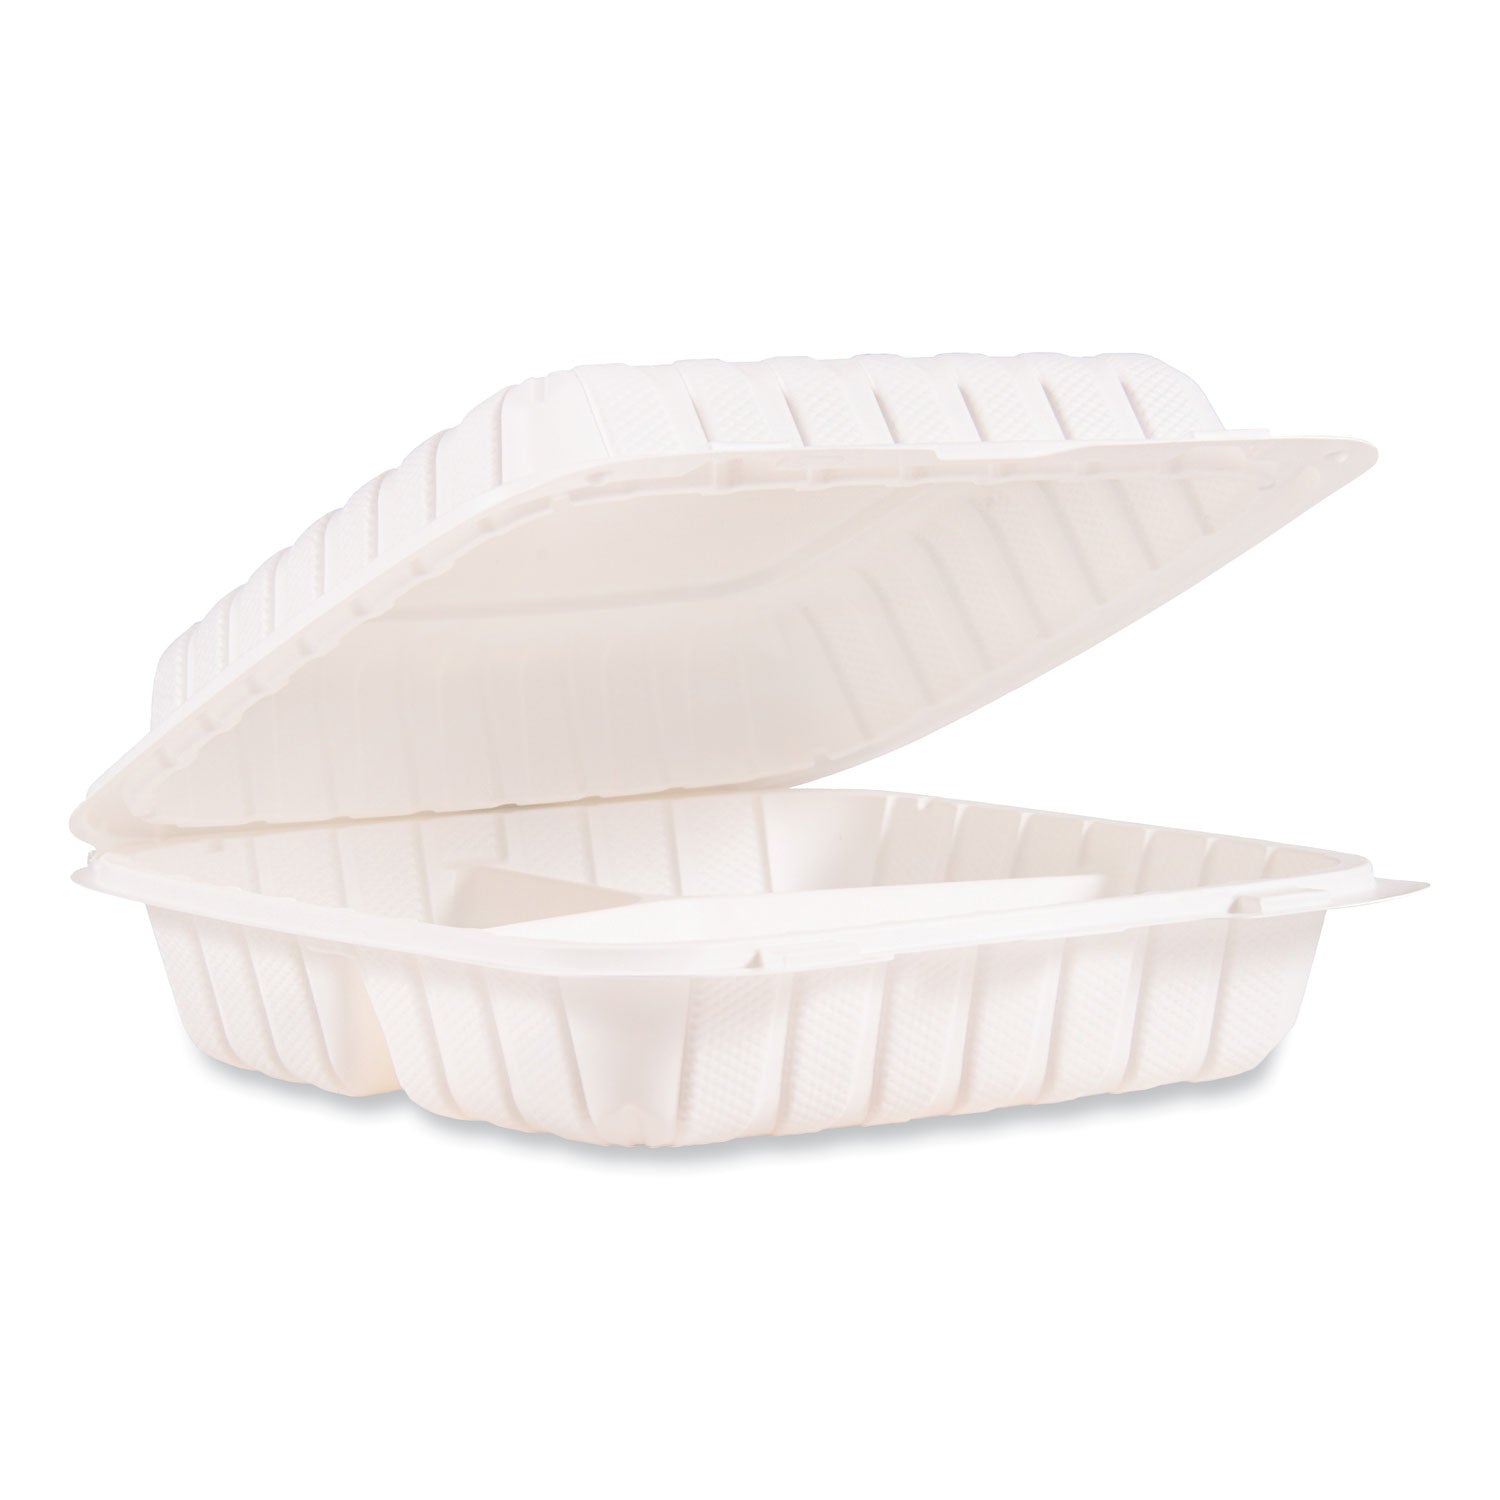 hinged-lid-containers-3-compartment-9-x-875-x-3-white-plastic-150-carton_dcc90mfppht3r - 1